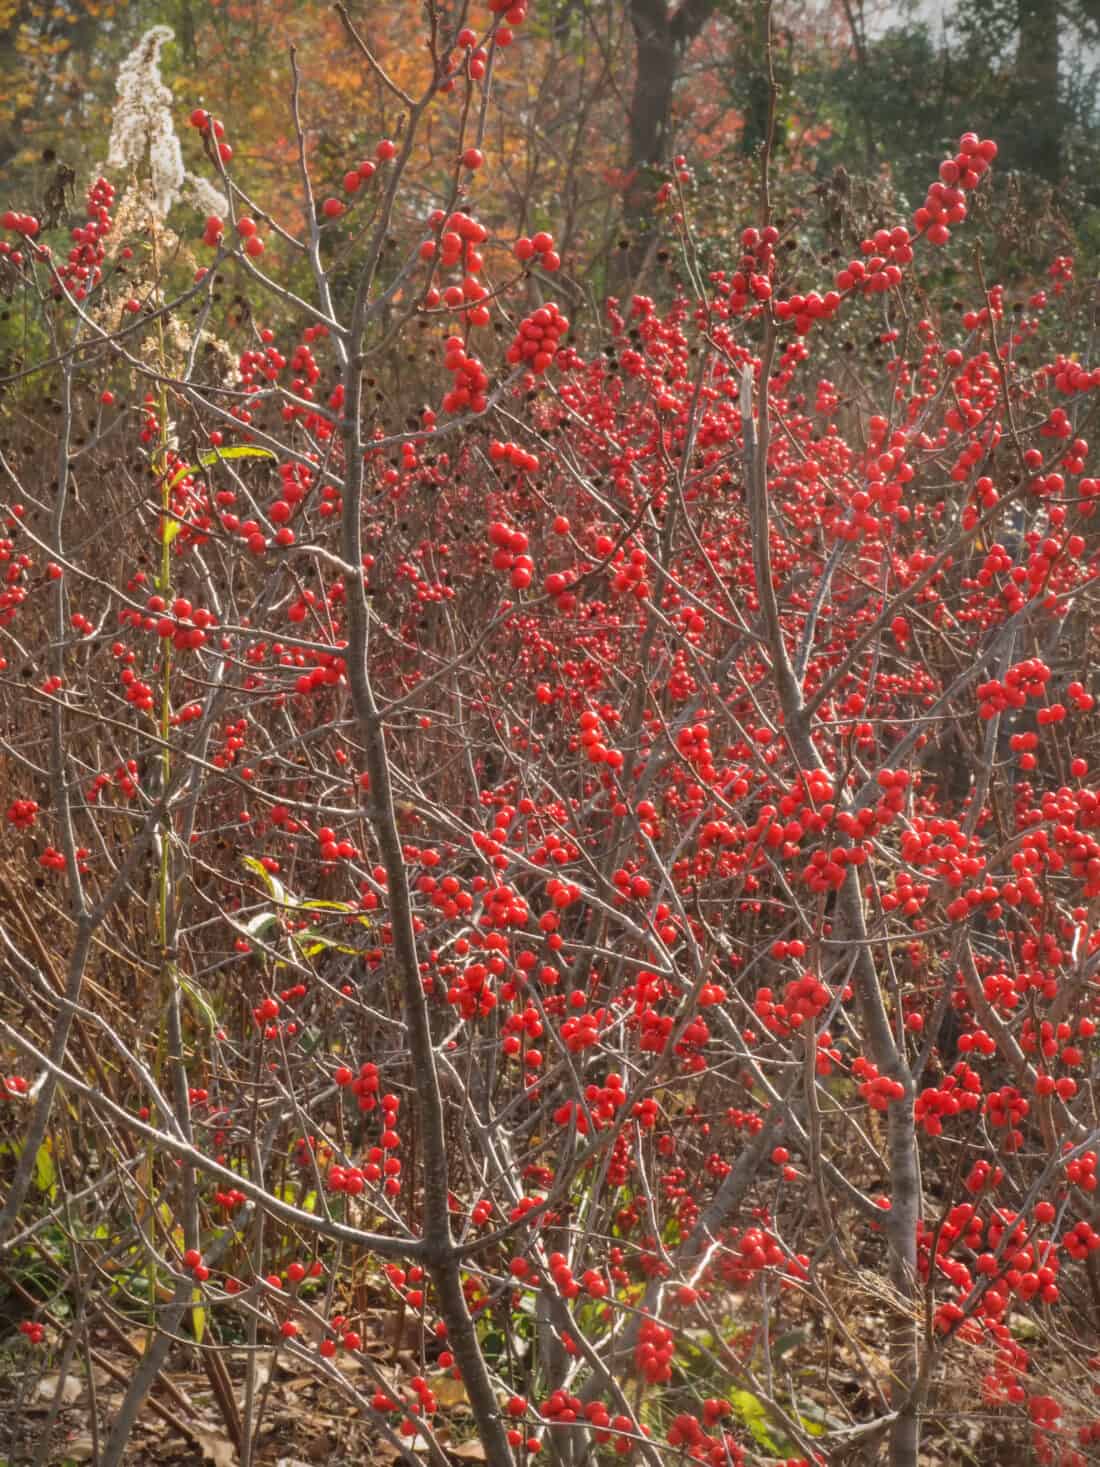 A bush with red berries.